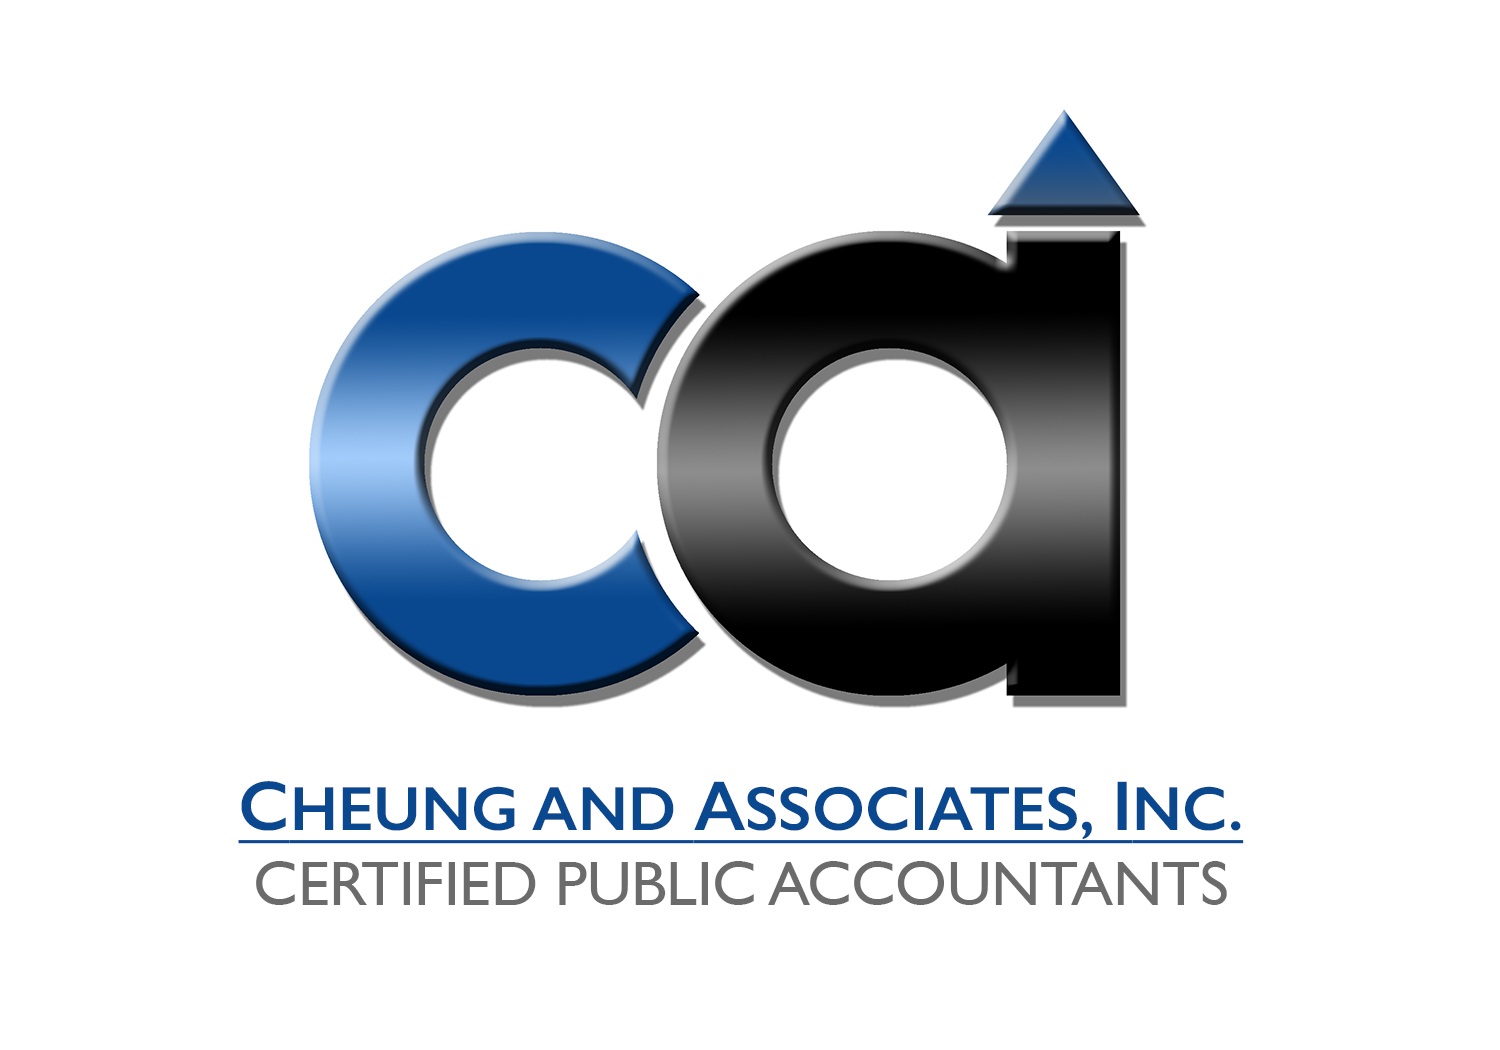 Cheung and Associates, Inc. CPA